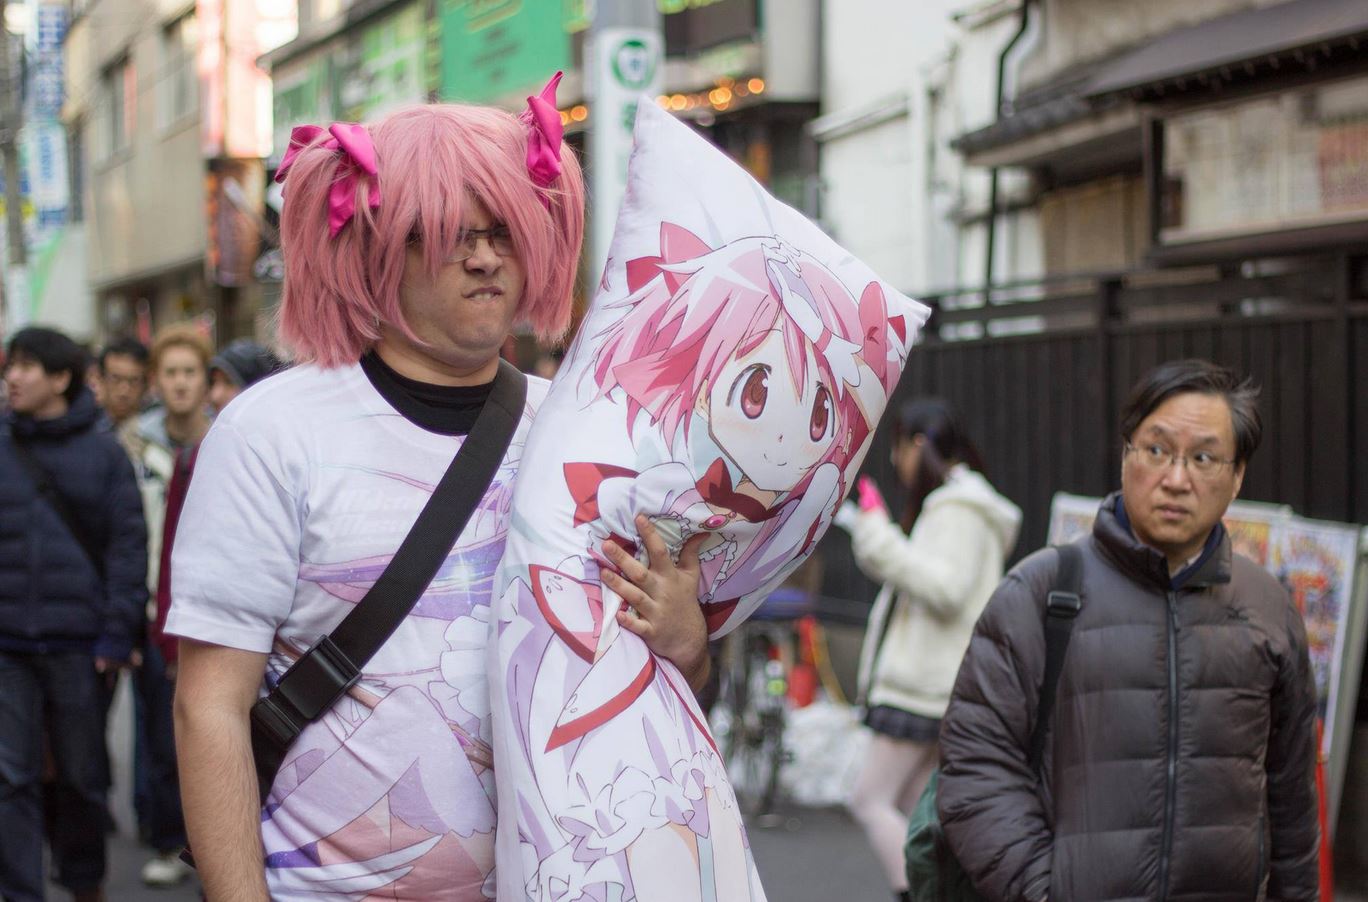 Weebs are pretty much like weirdos for normal people. 